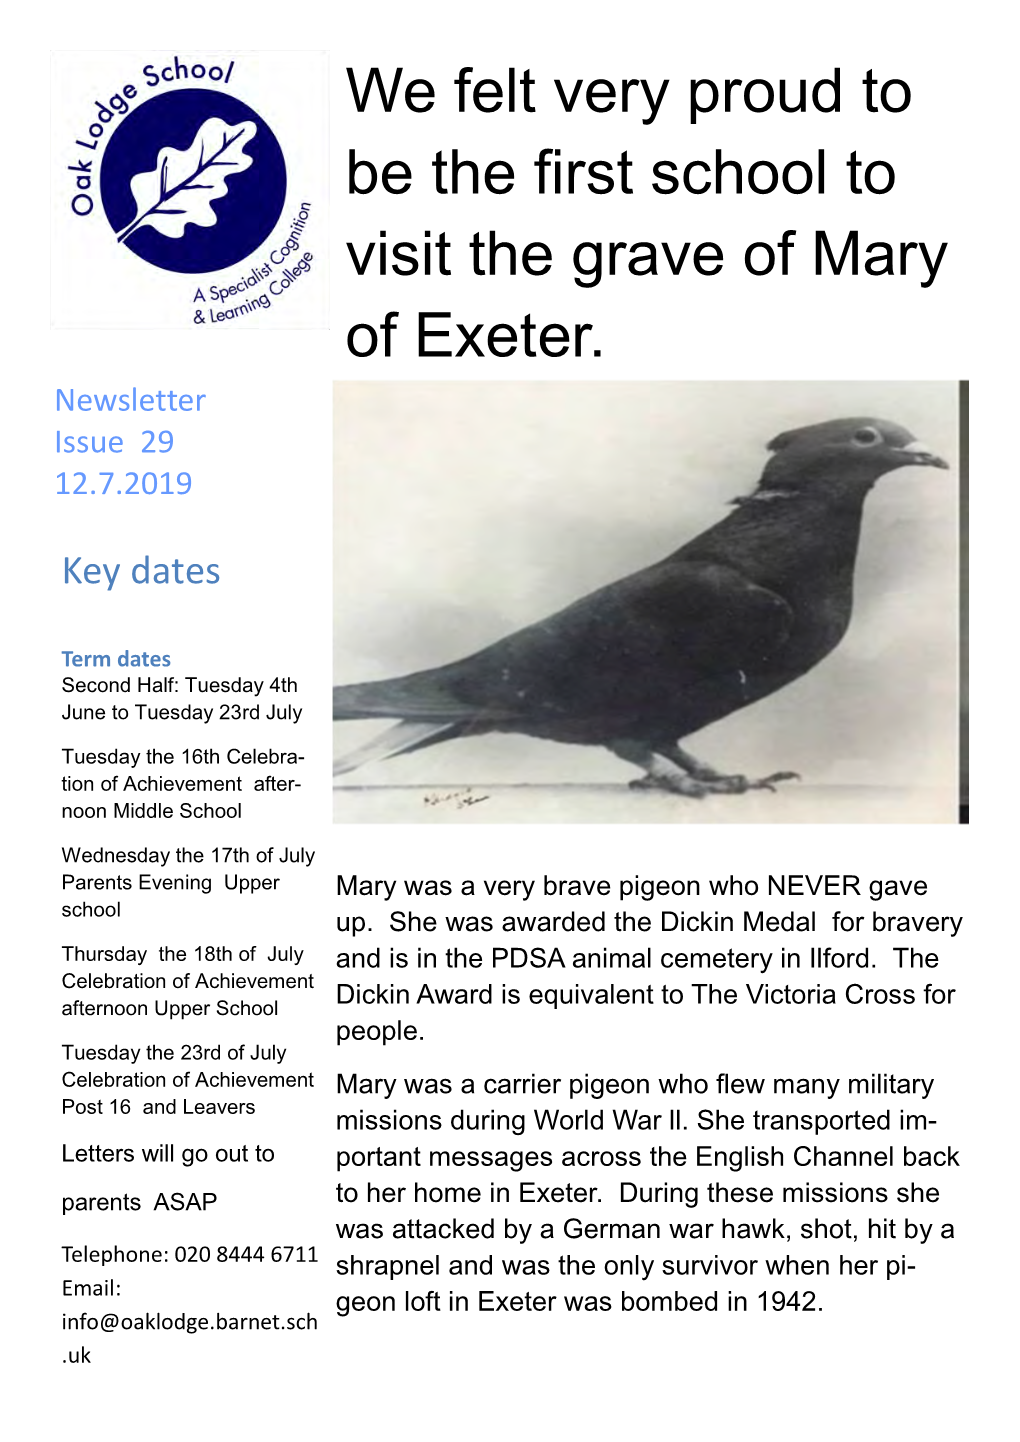 We Felt Very Proud to Be the First School to Visit the Grave of Mary of Exeter